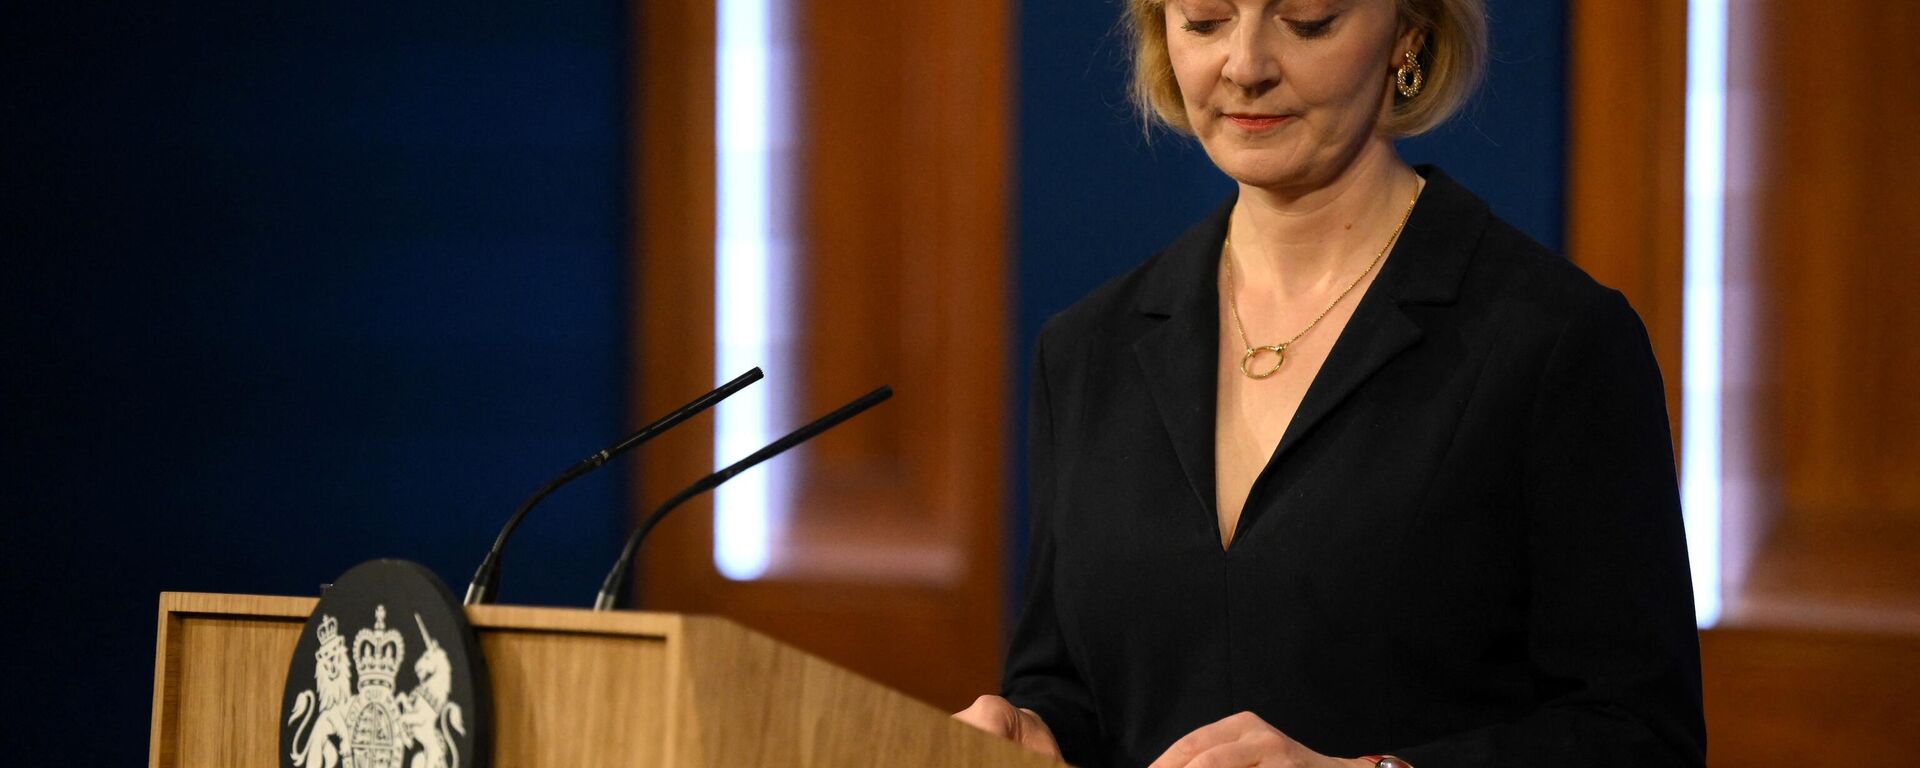 Britain's Prime Minister Liz Truss looks down during a press conference in the Downing Street Briefing Room in central London on October 14, 2022 - Sputnik International, 1920, 18.10.2022